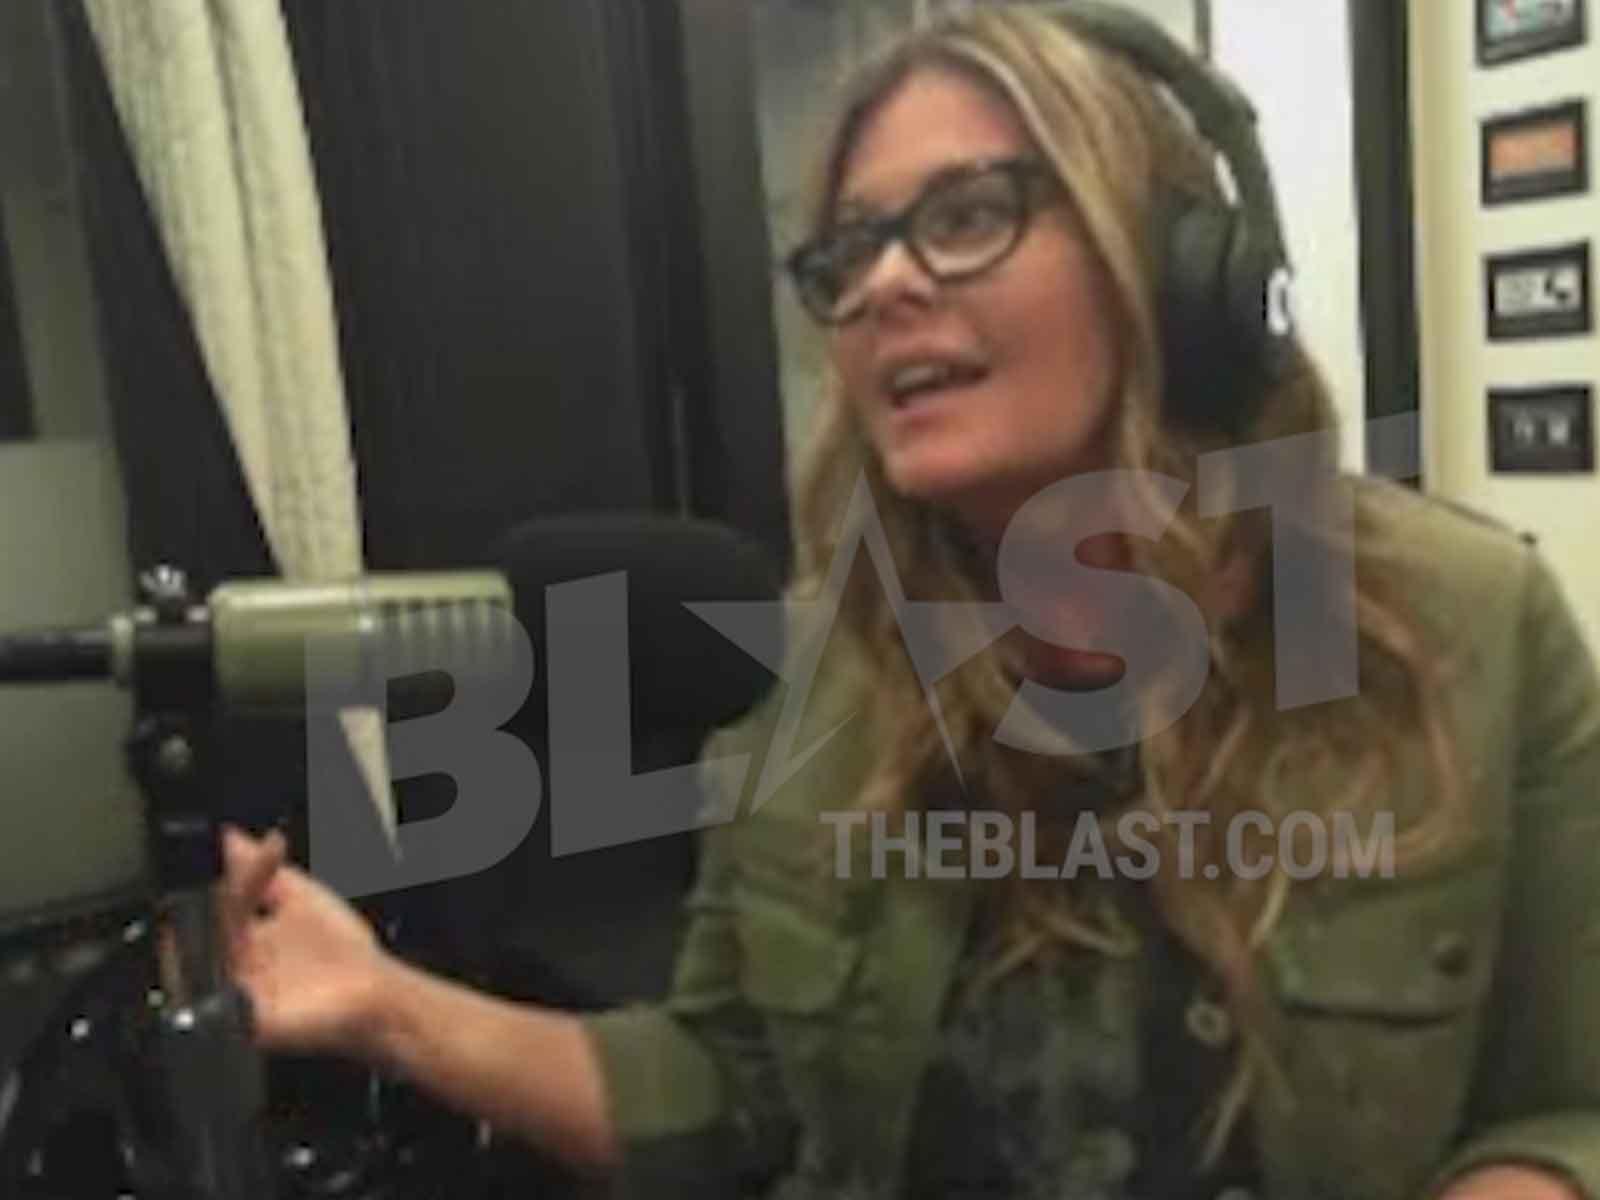 Nicole Eggert Alleges She ‘Messed Around’ With Scott Baio As a Minor: See The Video